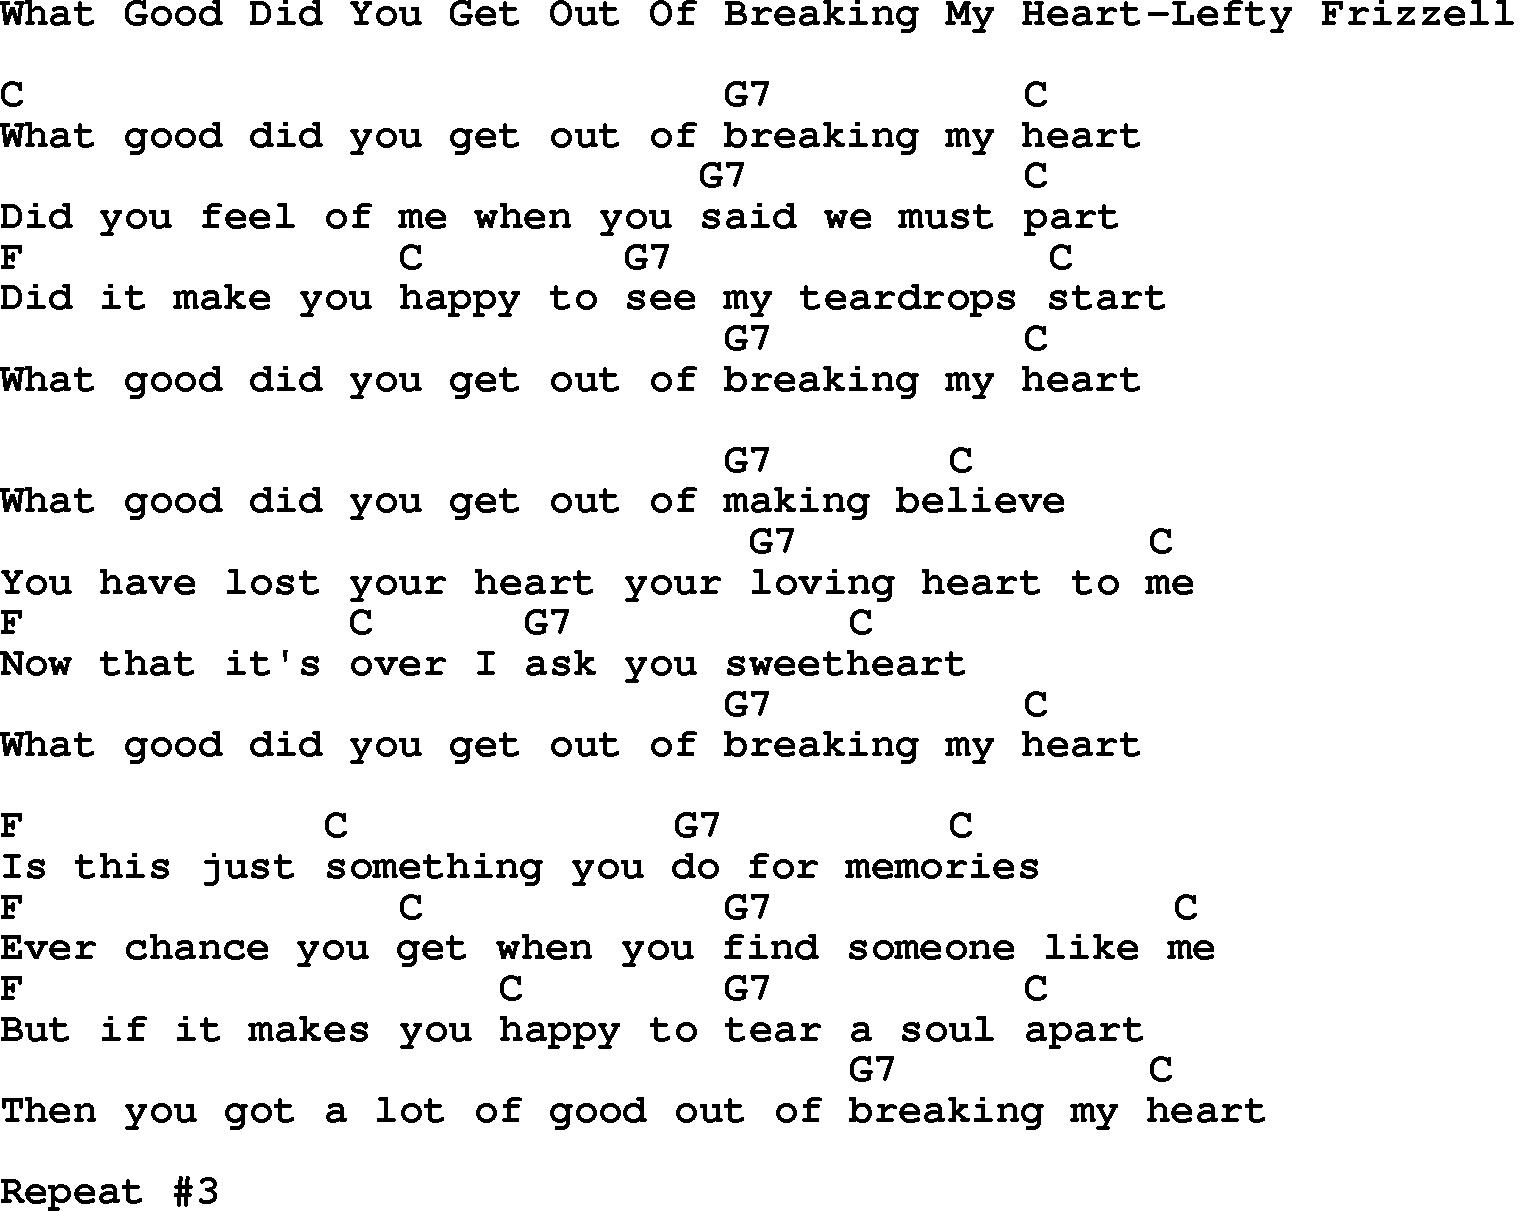 Country music song: What Good Did You Get Out Of Breaking My Heart-Lefty Frizzell lyrics and chords